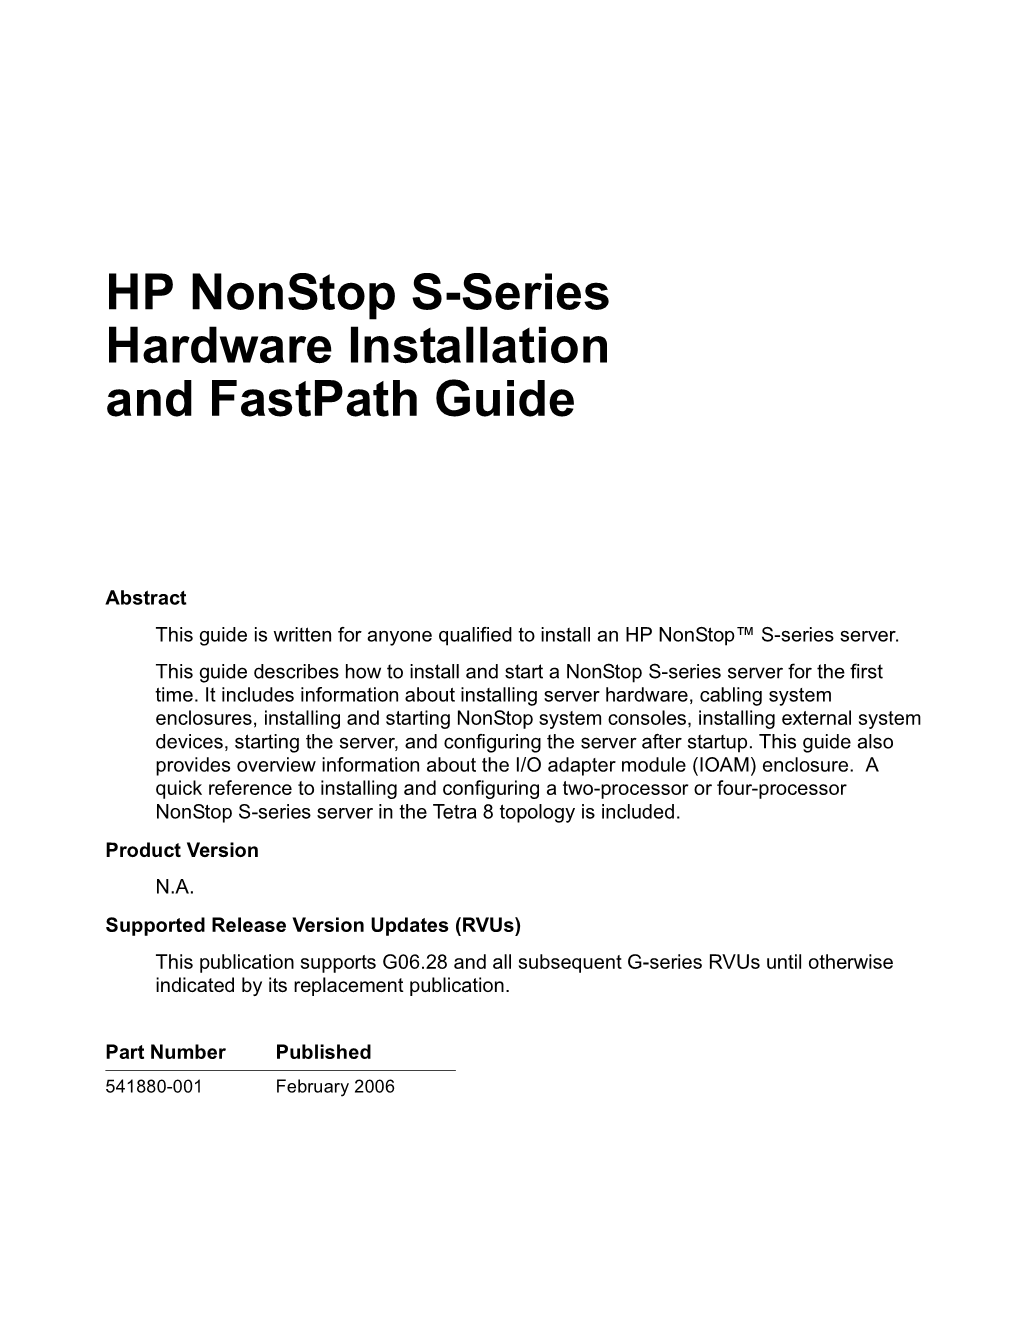 Nonstop S-Series Hardware Installation and Fastpath Guide